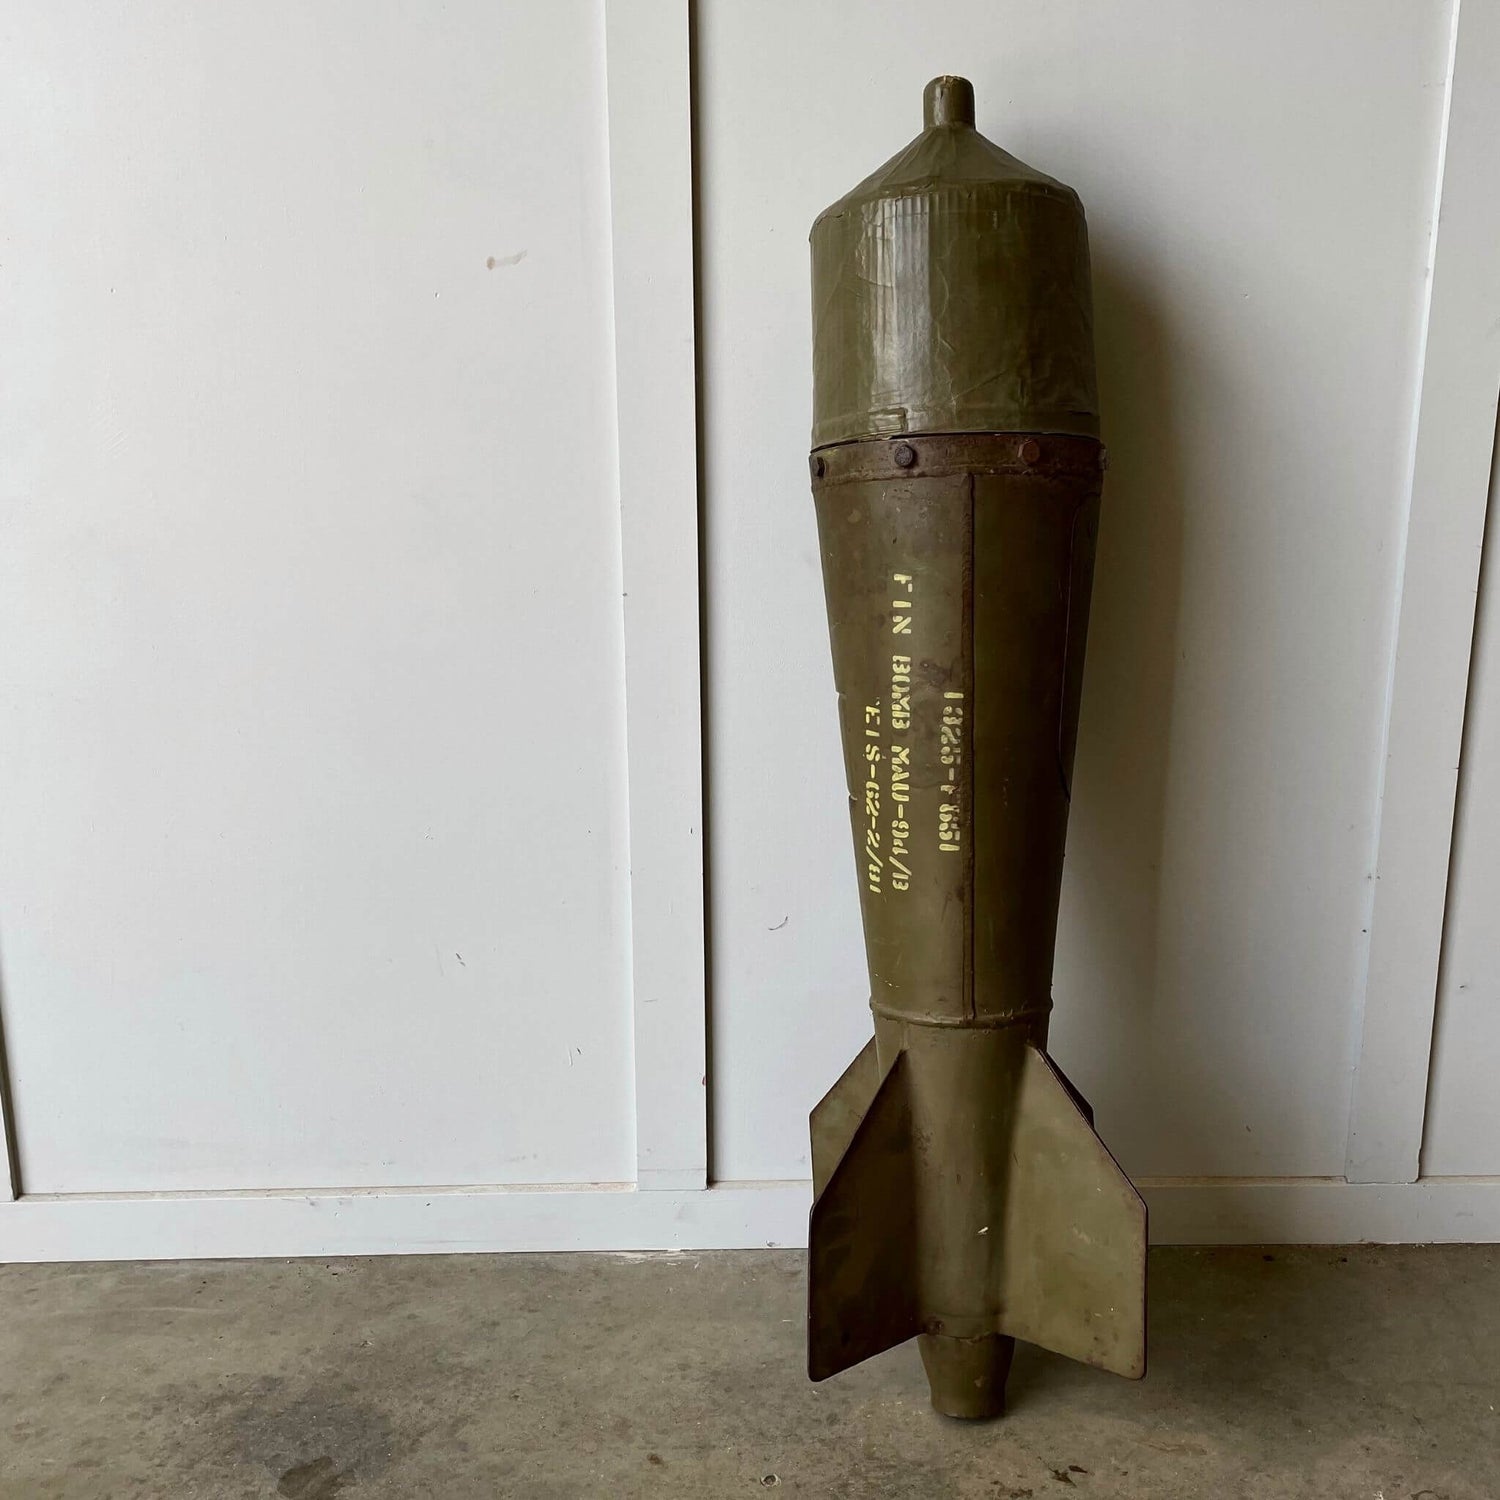 Antique and collectible motor bomb